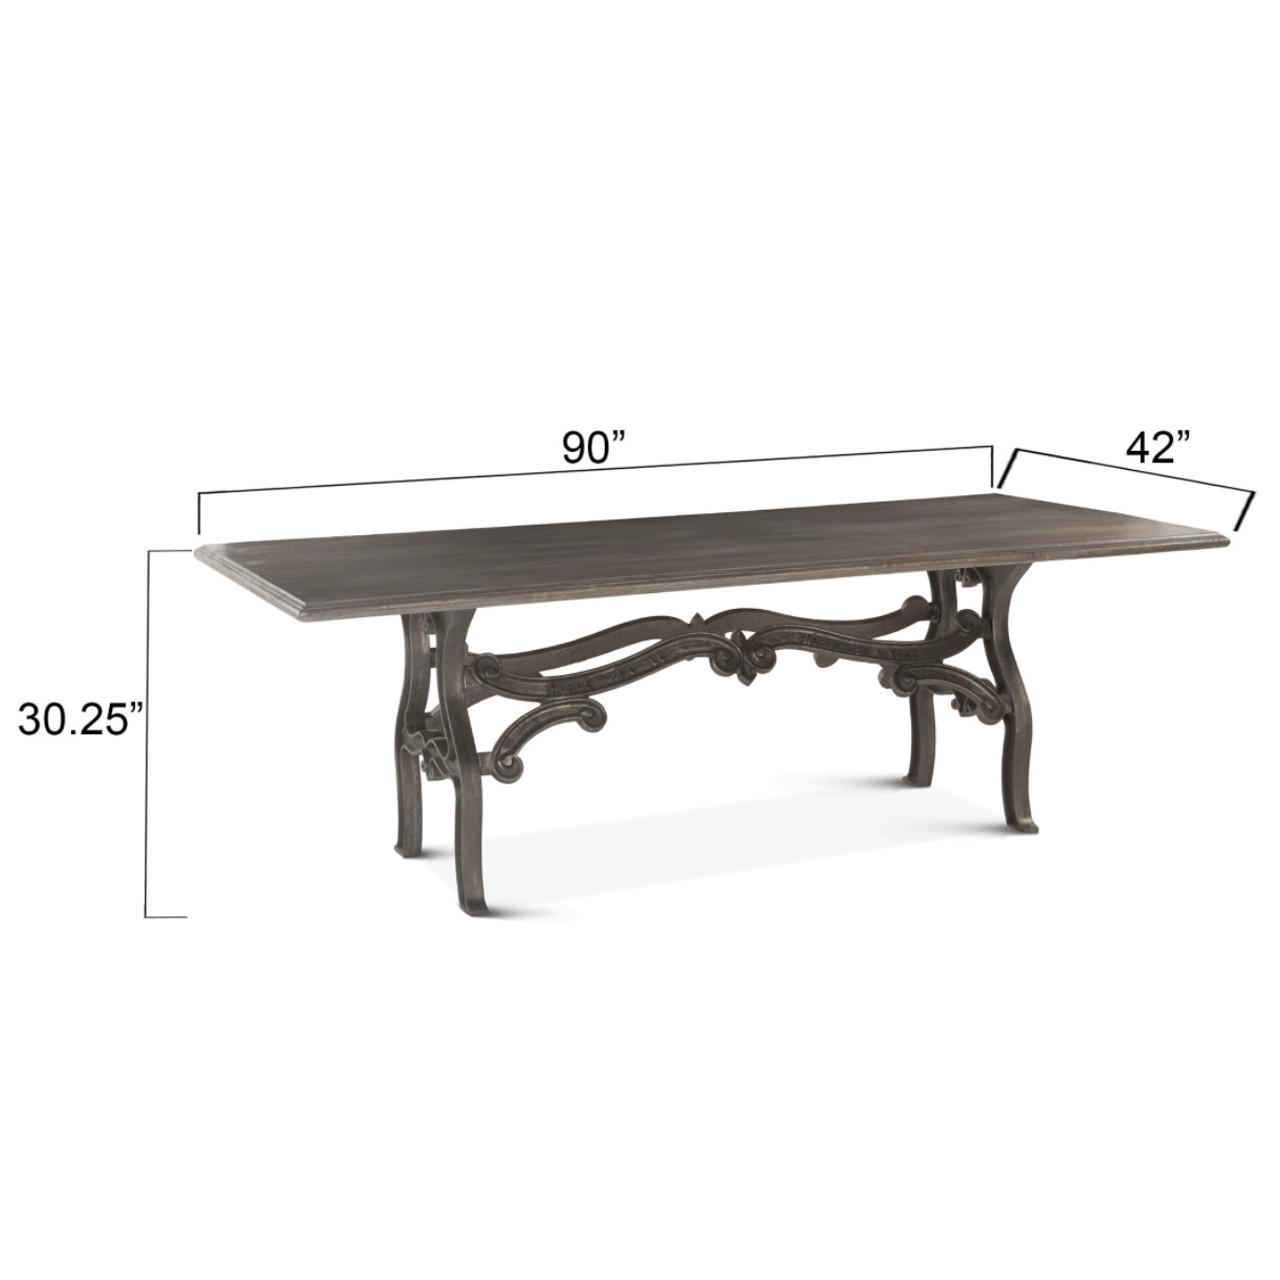 Hobbs Dutch Industrial Iron & Wood Dining Table 90